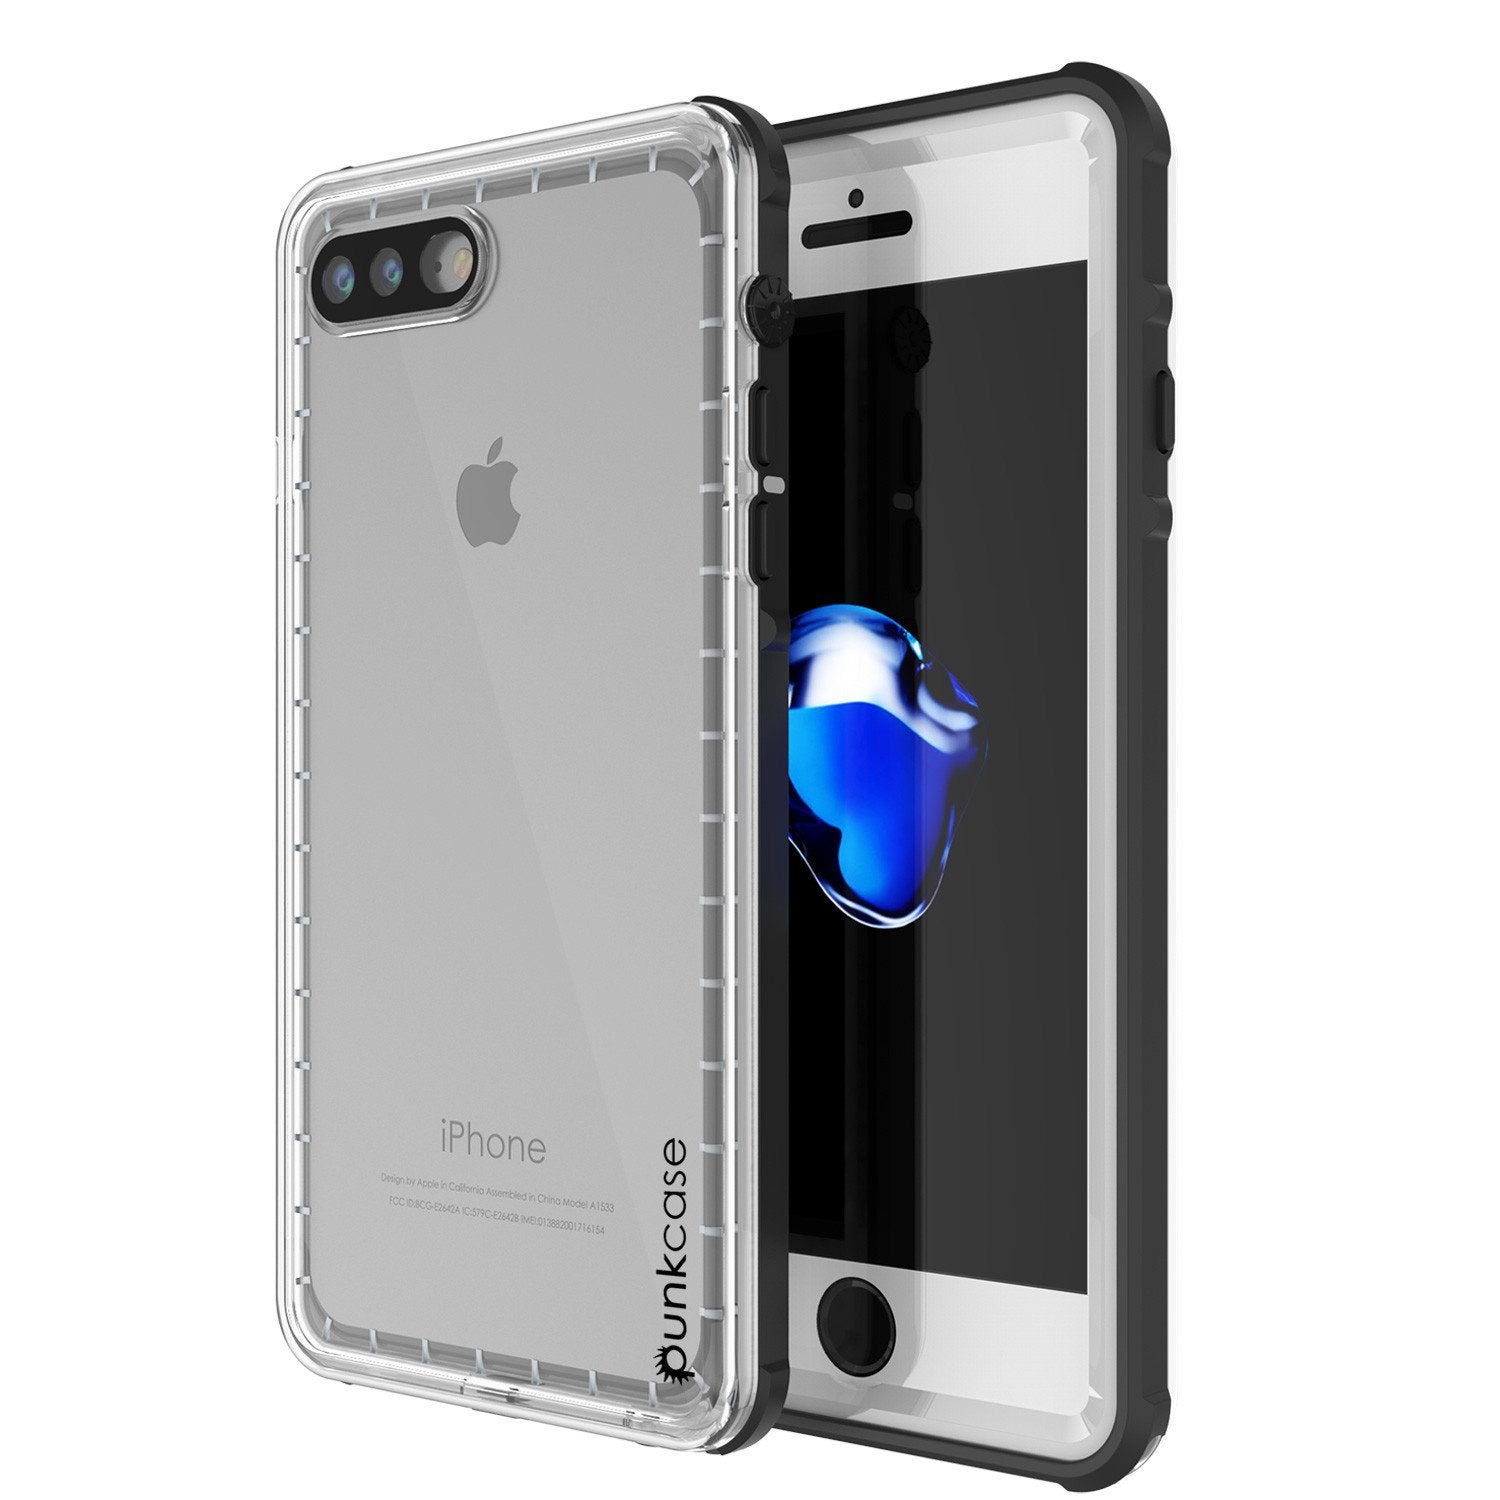 iPhone 8+ Plus Waterproof Case, PUNKcase CRYSTAL White W/ Attached Screen Protector  | Warranty - PunkCase NZ